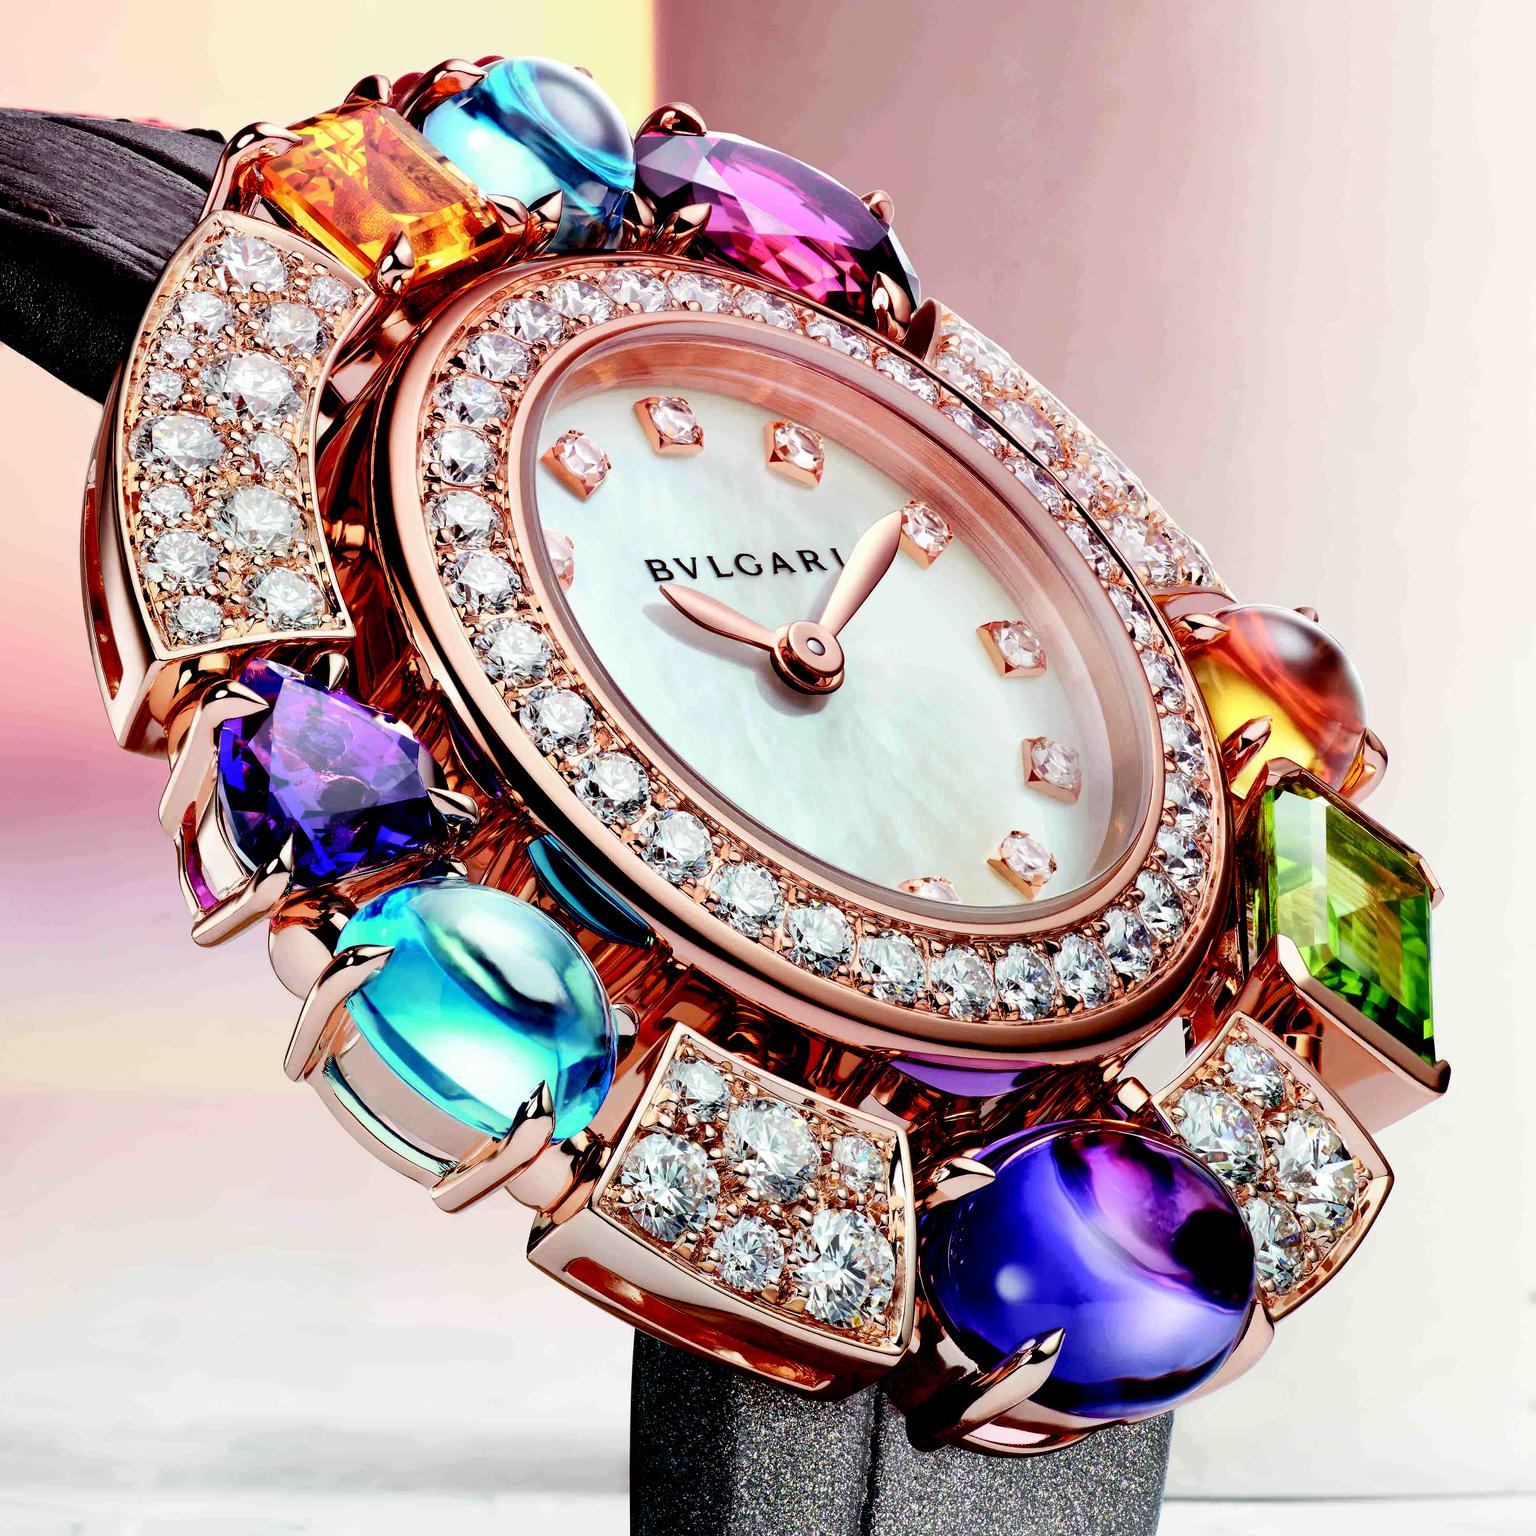 Divissima Astrale watch in pink gold by Bulgari